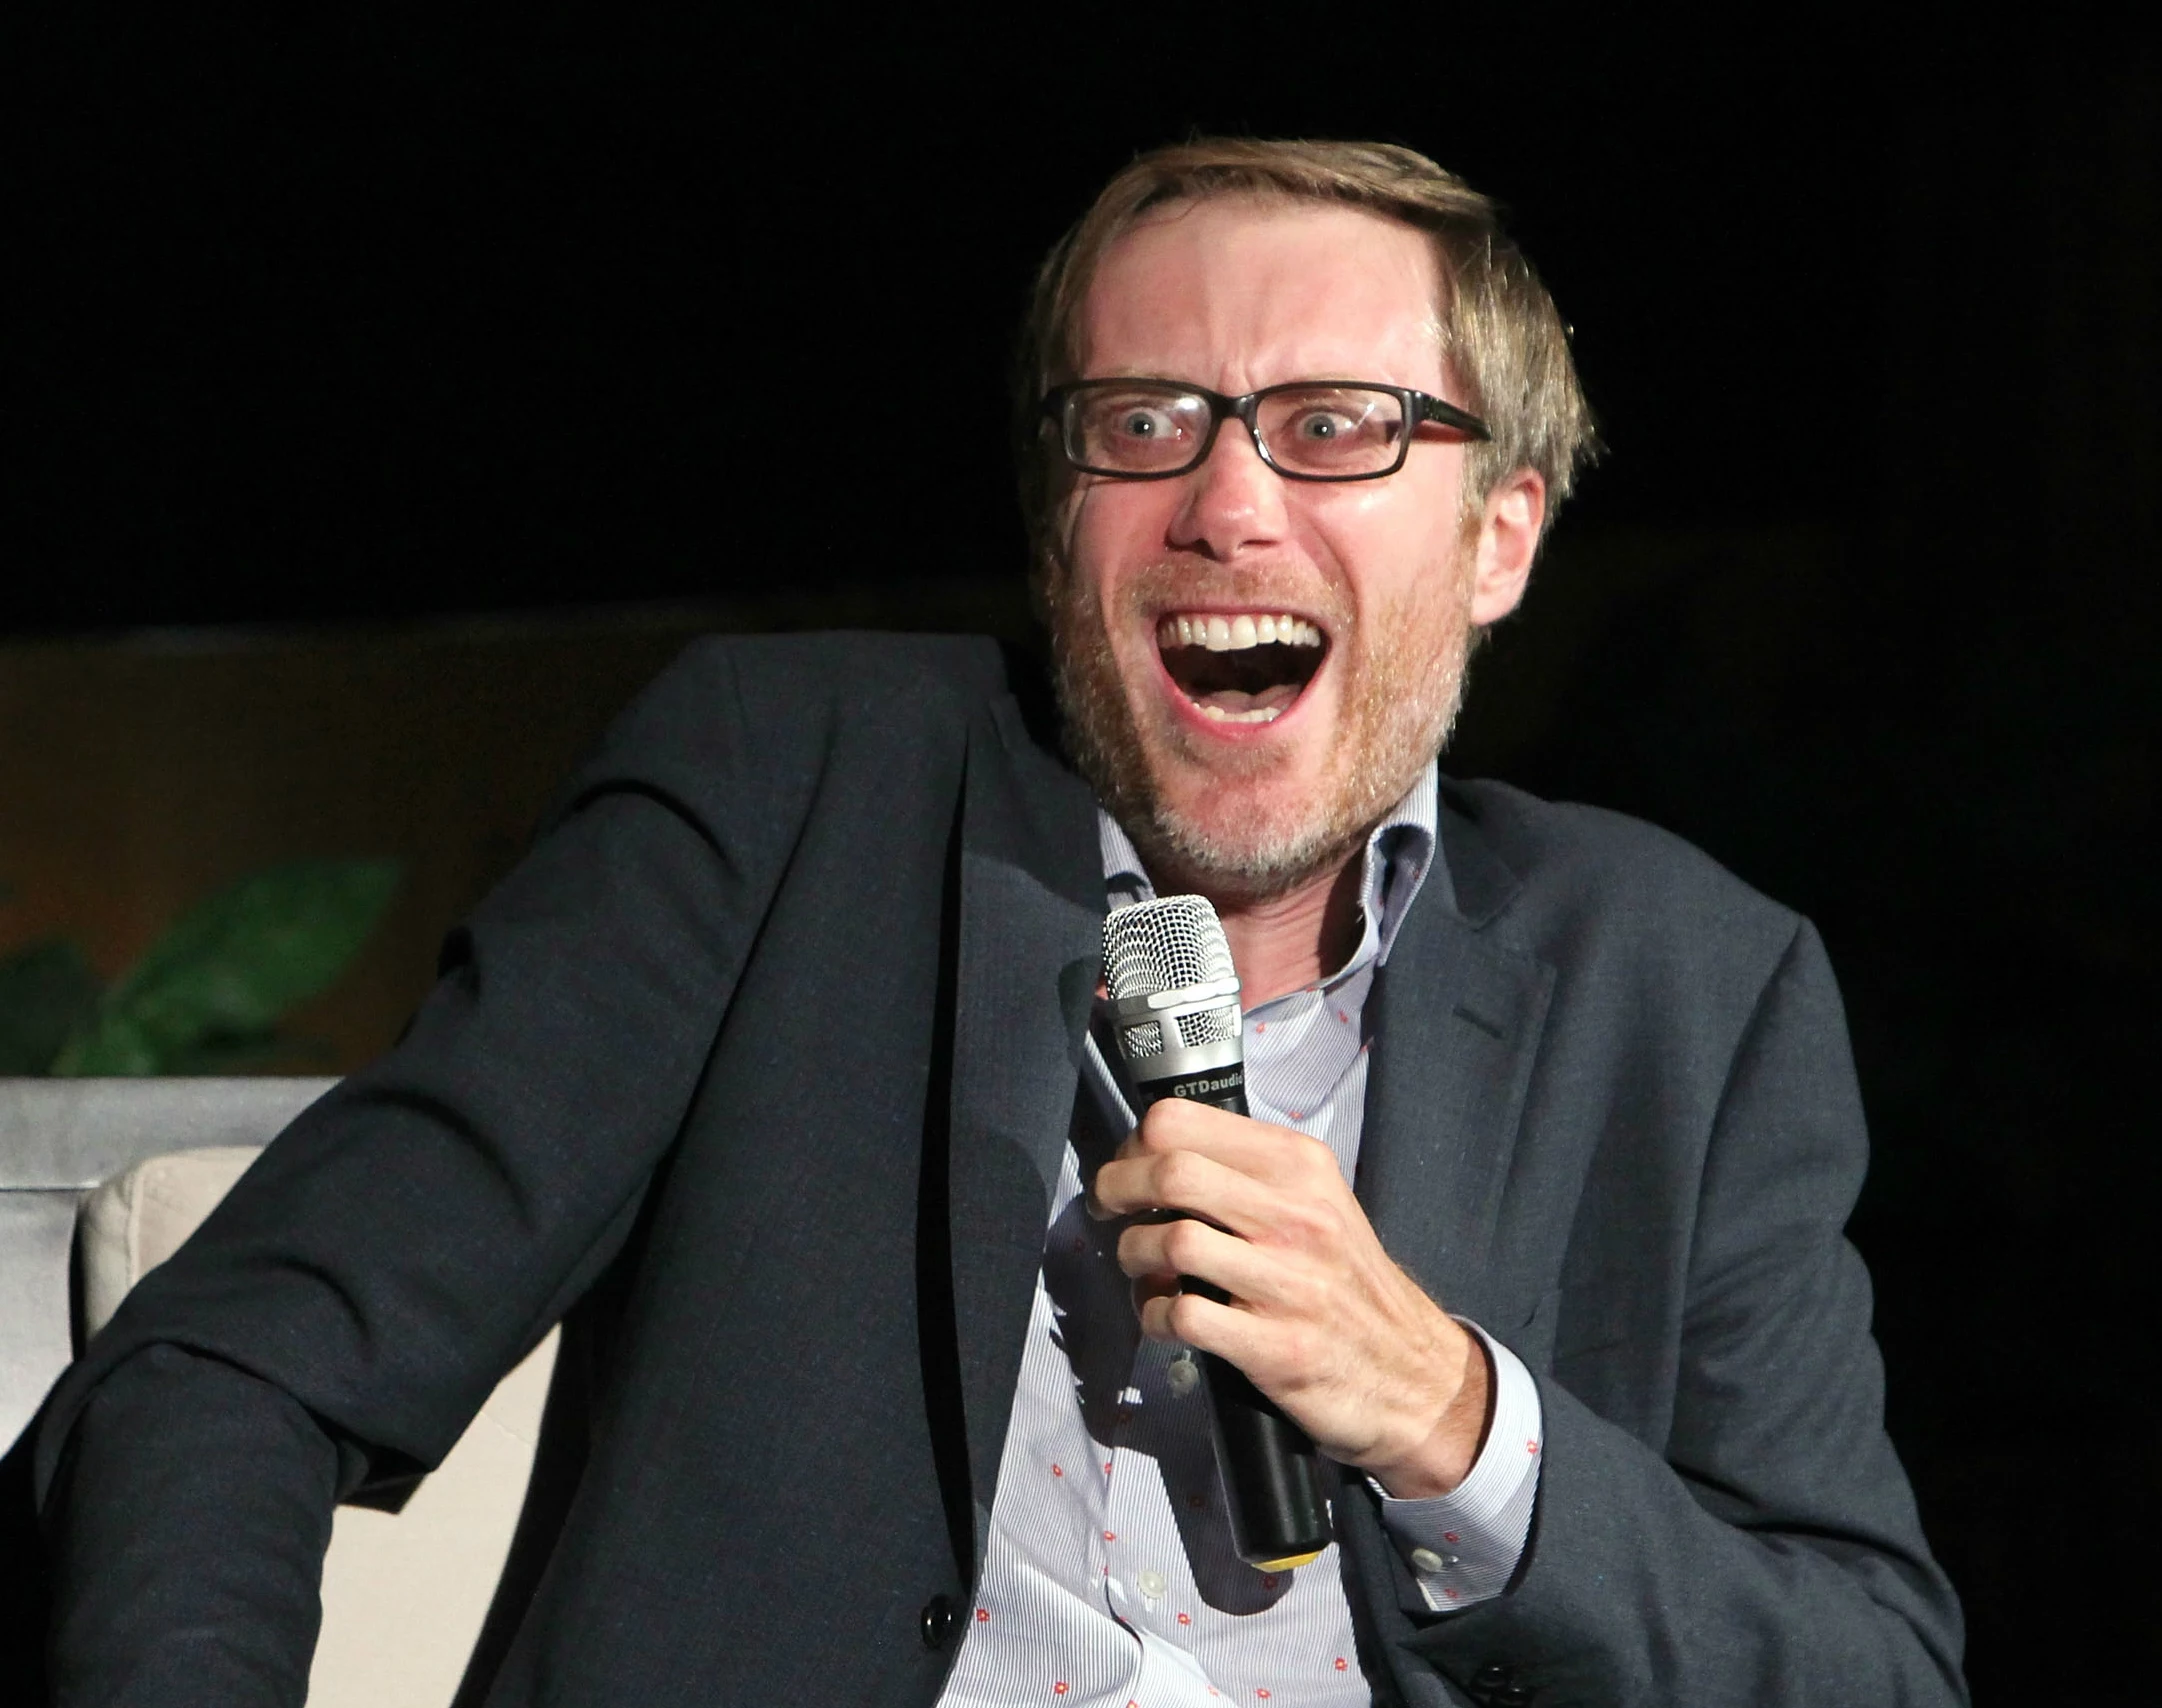 Free Beer & Hot Wings: Stephen Merchant Talks TV Writing, Working In Radio  and His Awkwardness (Audio)